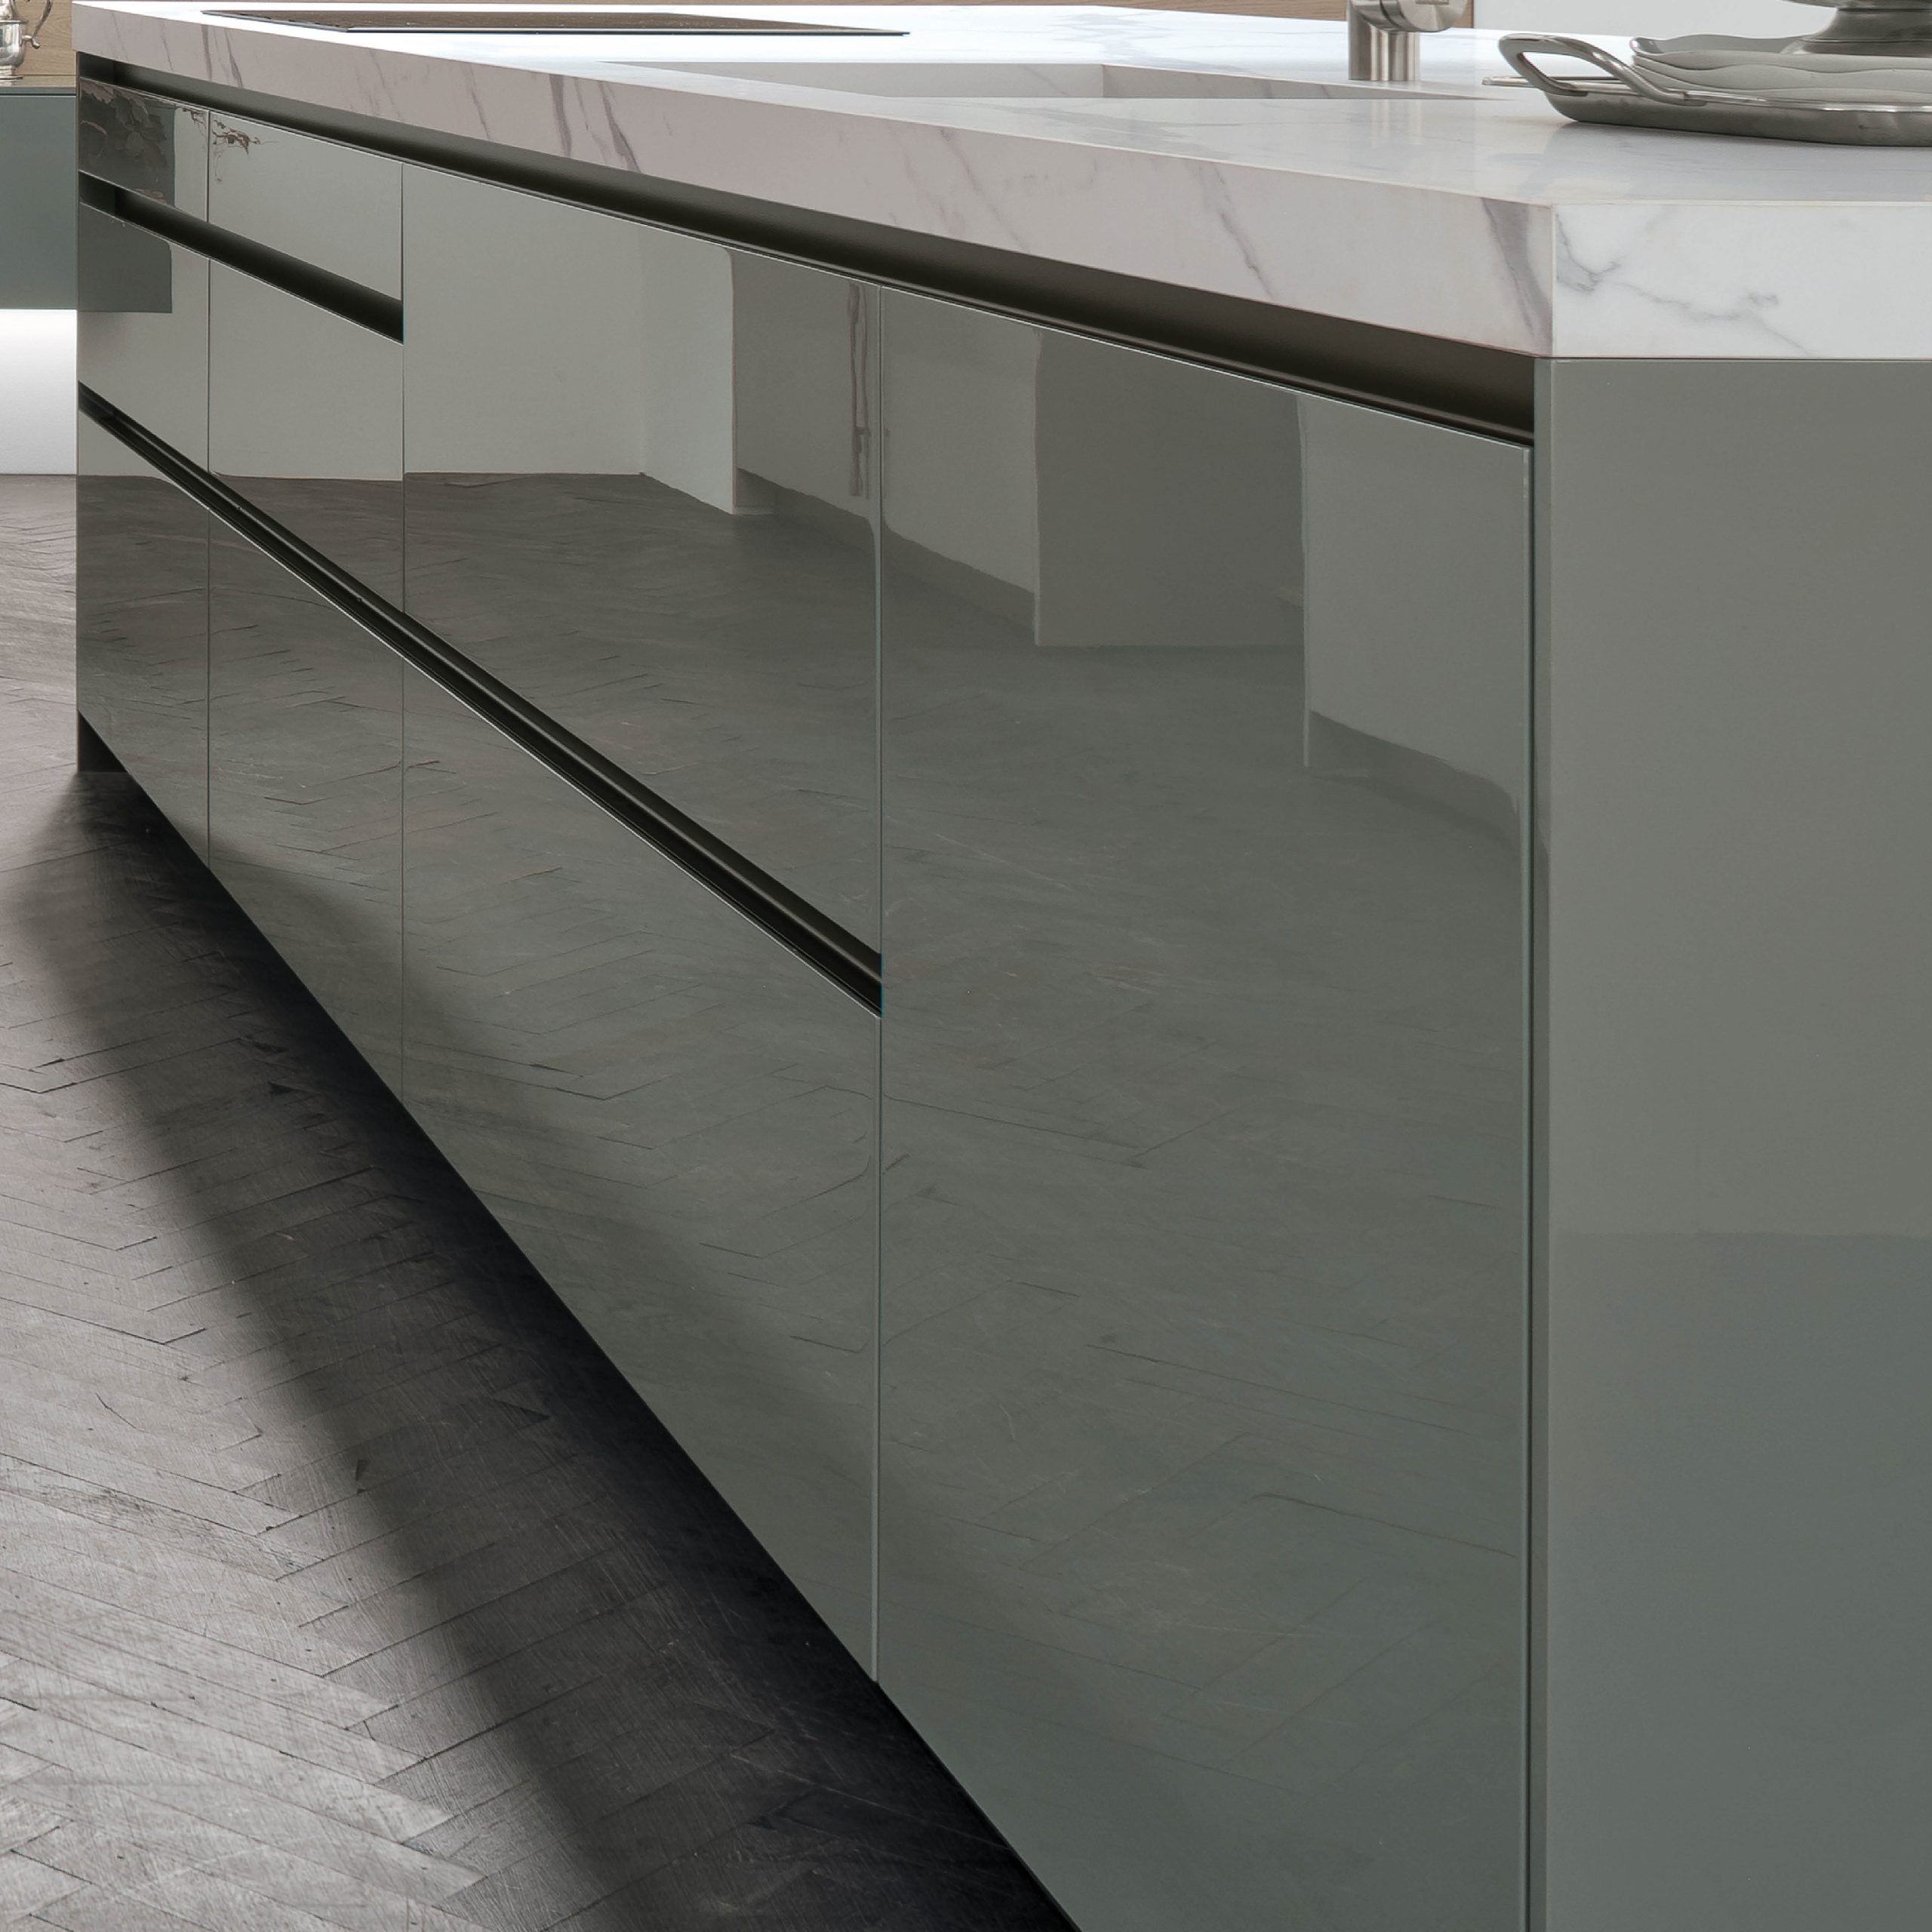 Modern Kitchens NYC - Color Trend - Laccato Lucido Timo2 Scaled 1 - Stosa Cucine
